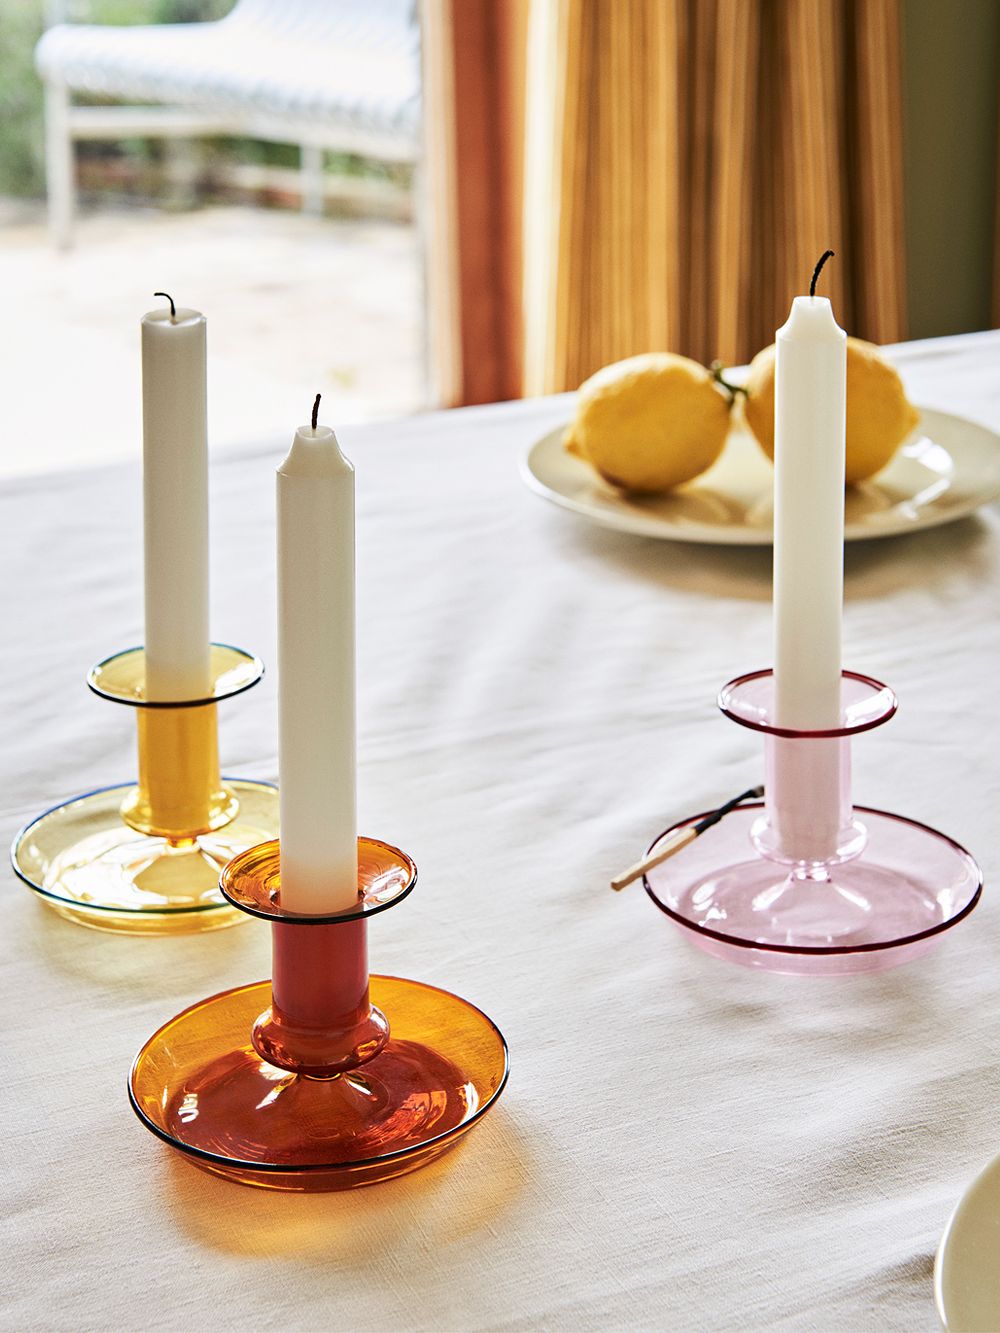 Hay's Flare candle holders in three spring colors on a table.